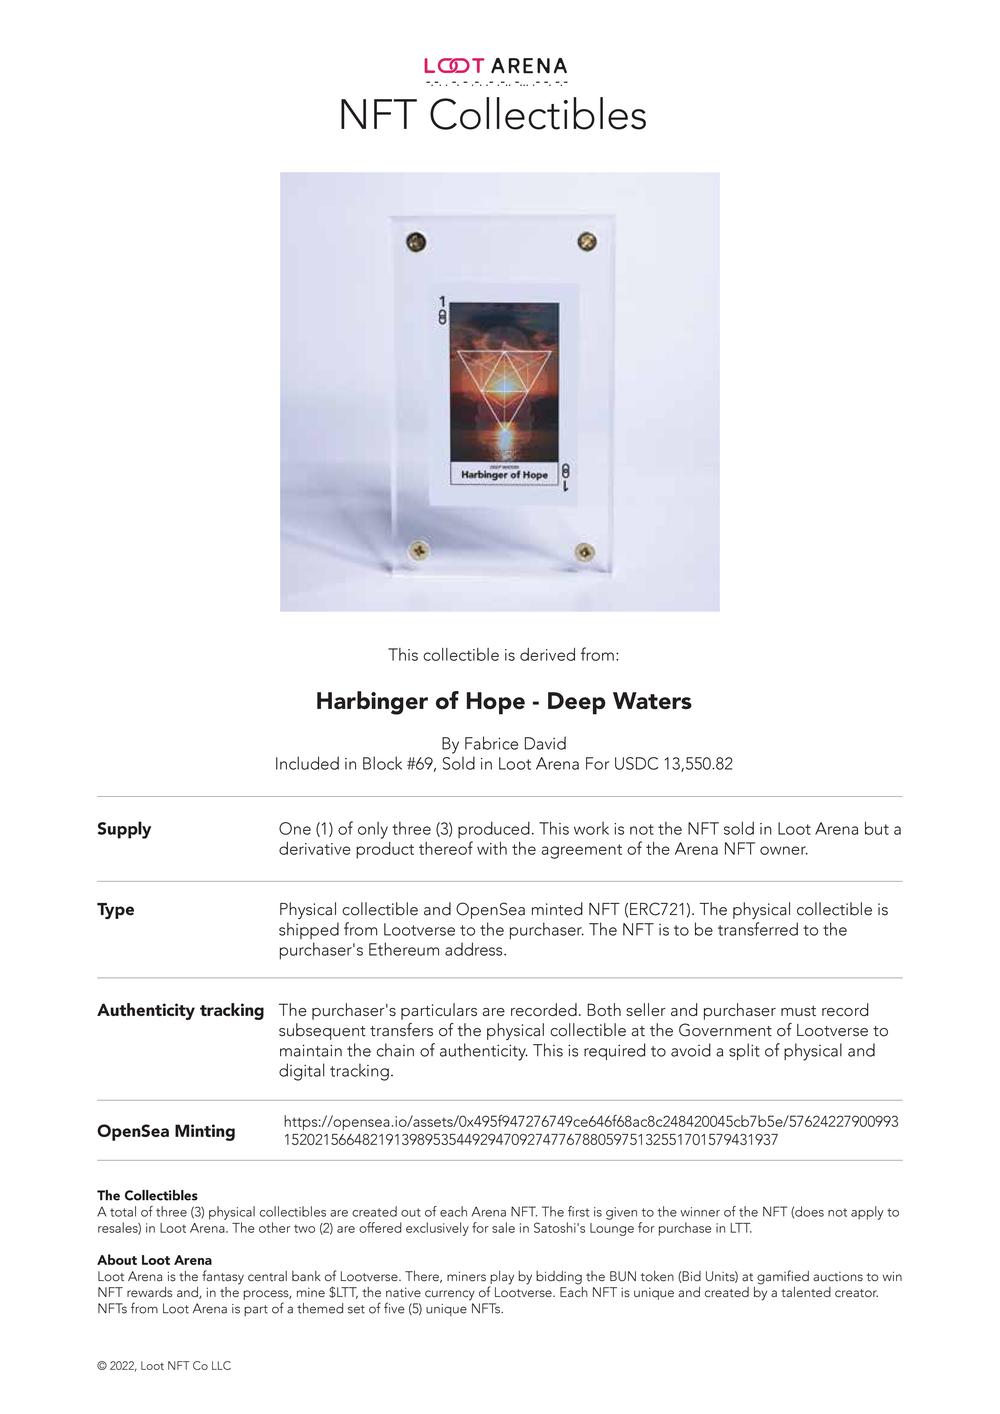 Harbinger of Hope_#1 Collectible_Contract.pdf